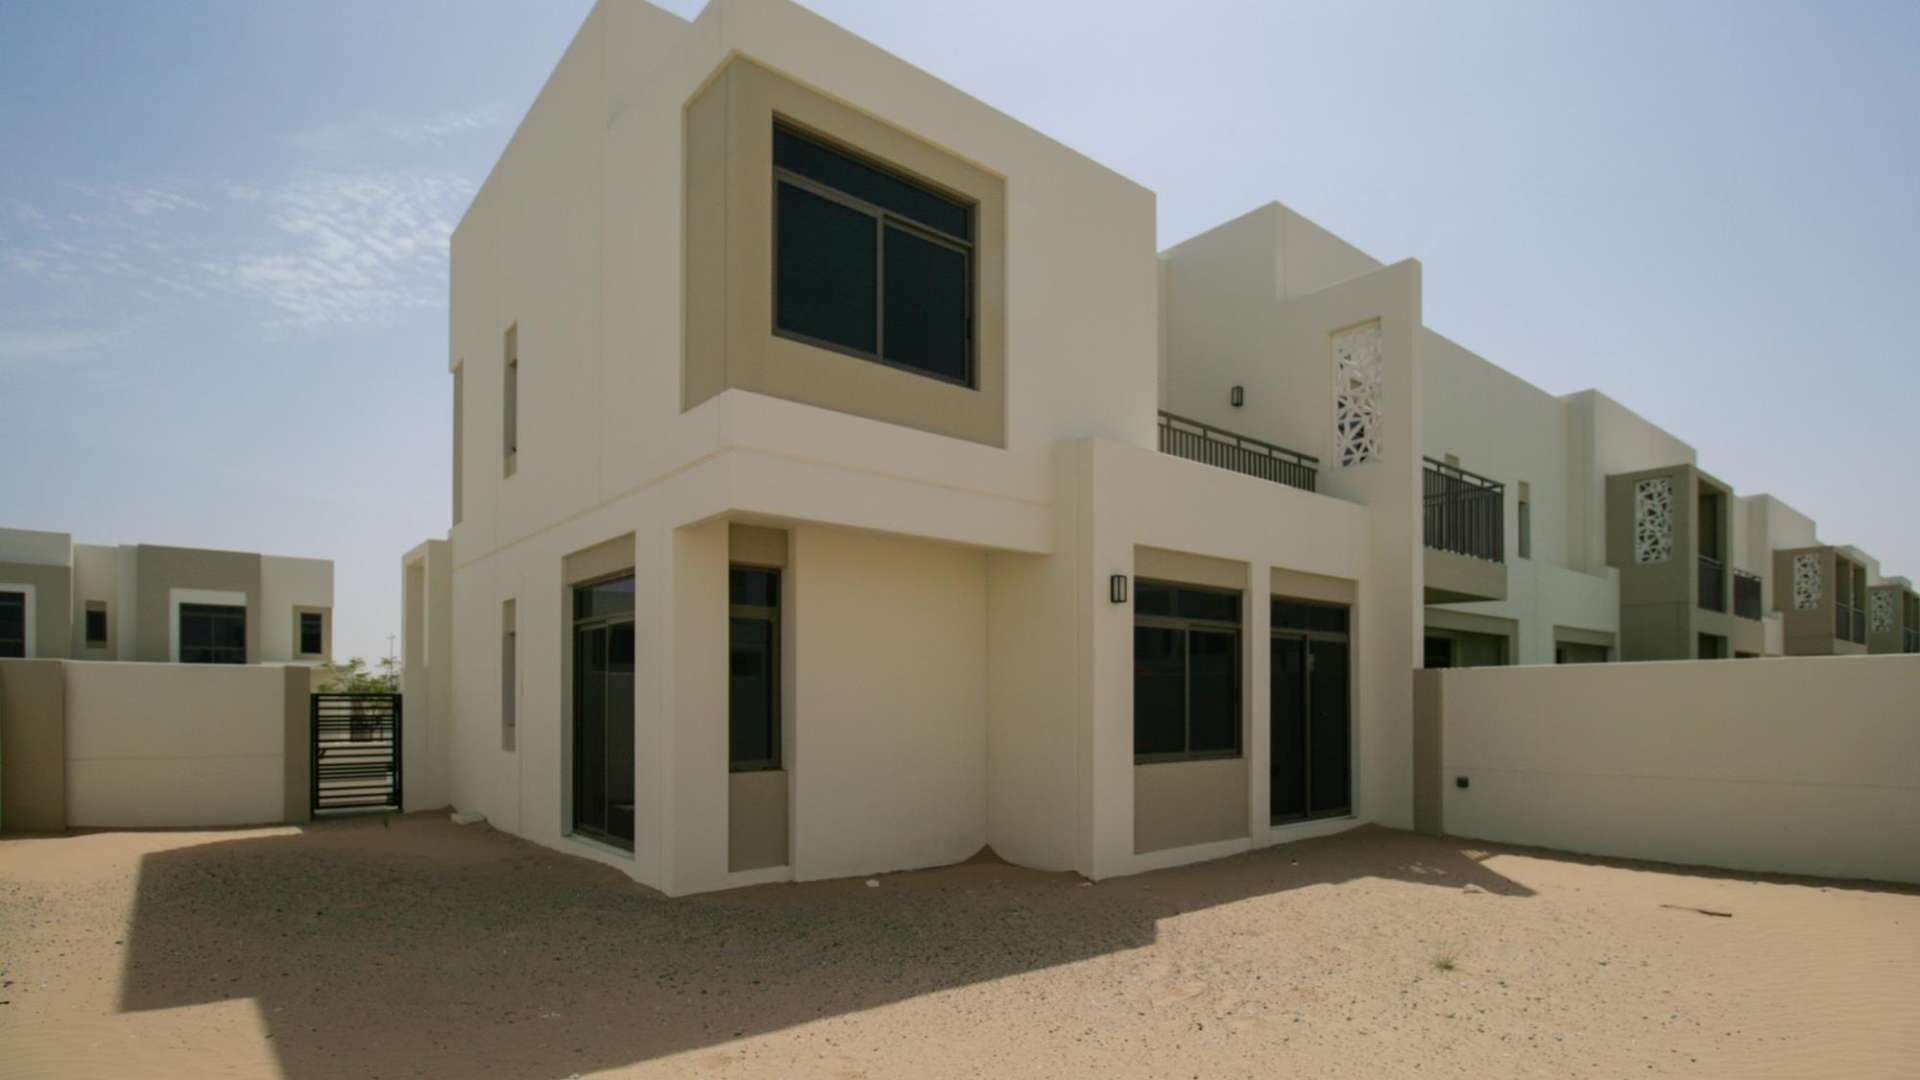 4 Bedroom Townhouse For Sale Noor Townhouse Lp07475 1e19aef565371900.jpg